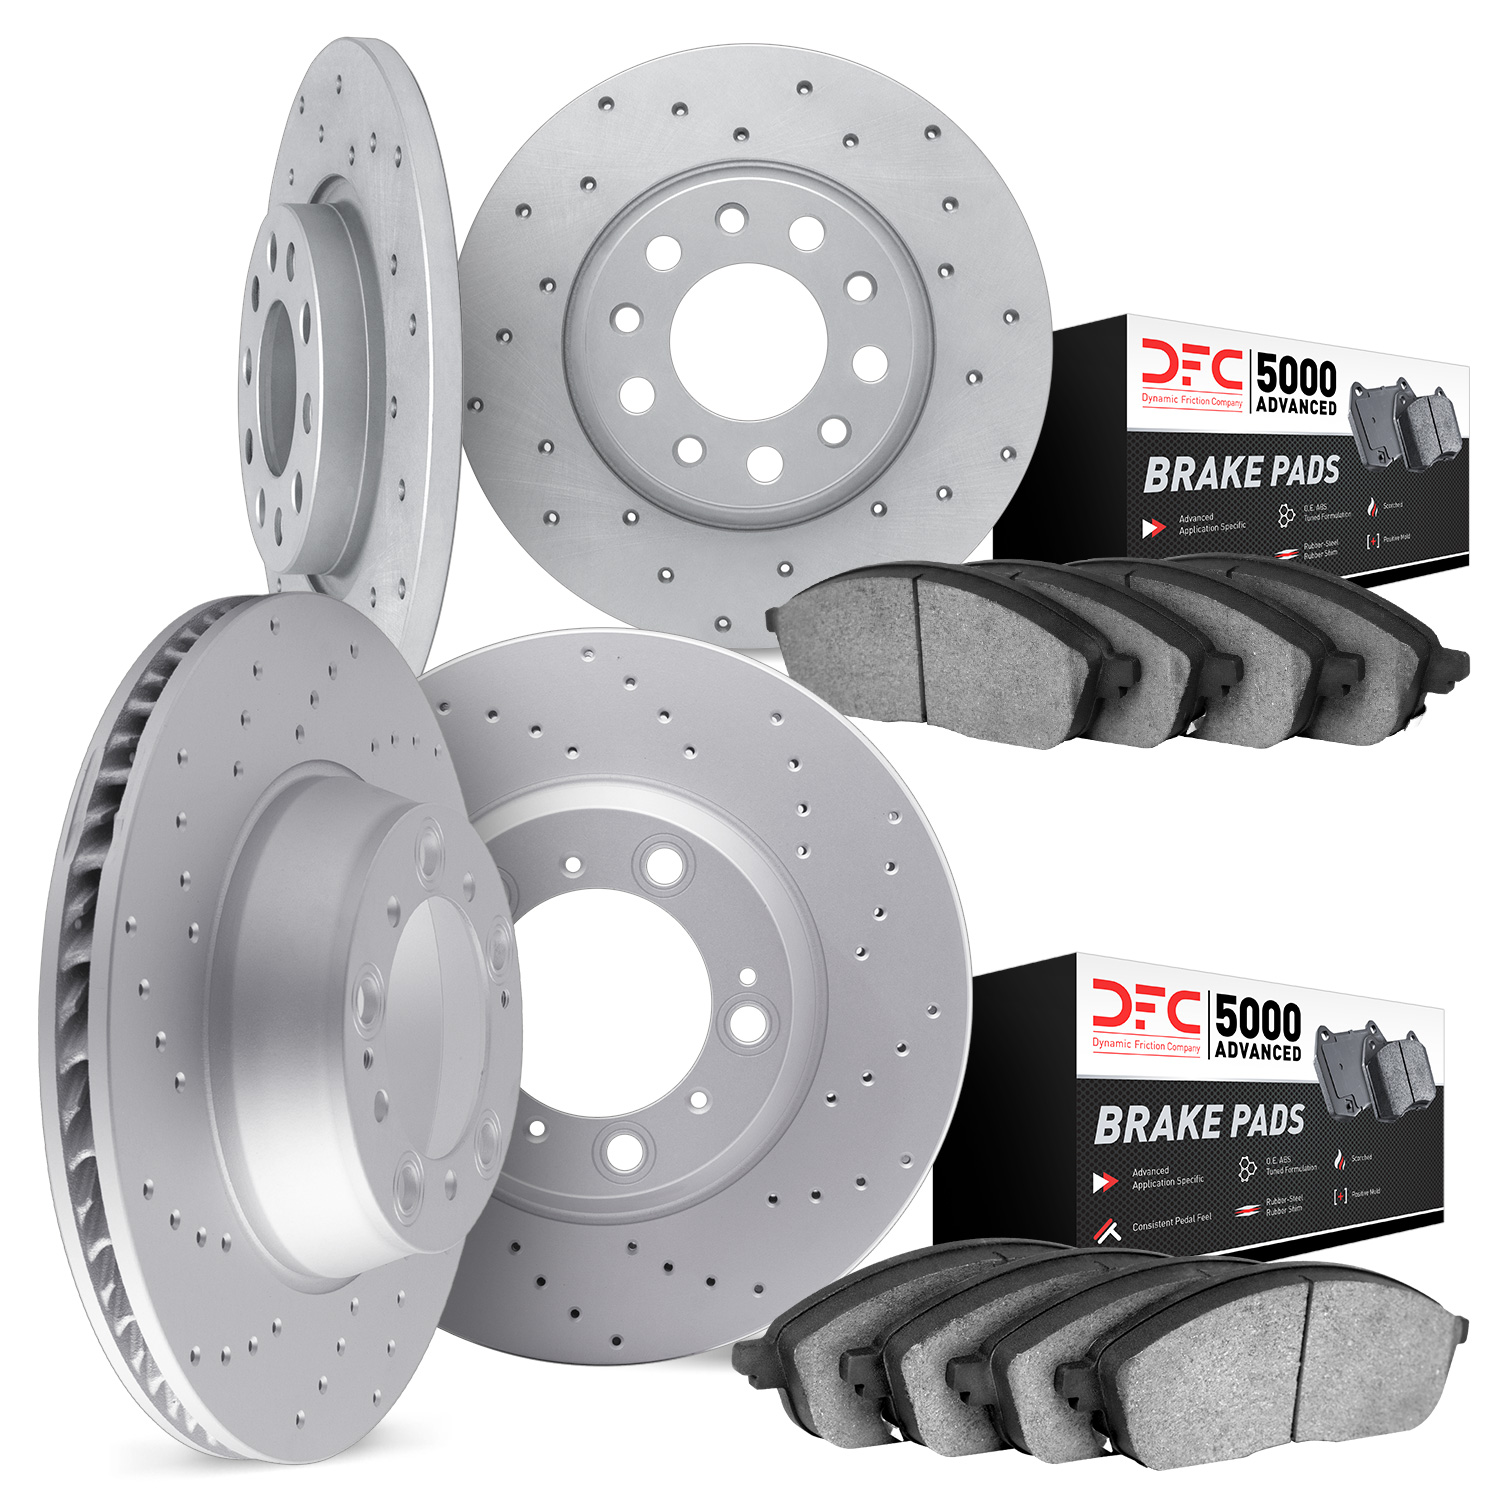 2704-59047 Geoperformance Drilled Brake Rotors with Active Performance Pads Kit, 2003-2007 Acura/Honda, Position: Front and Rear